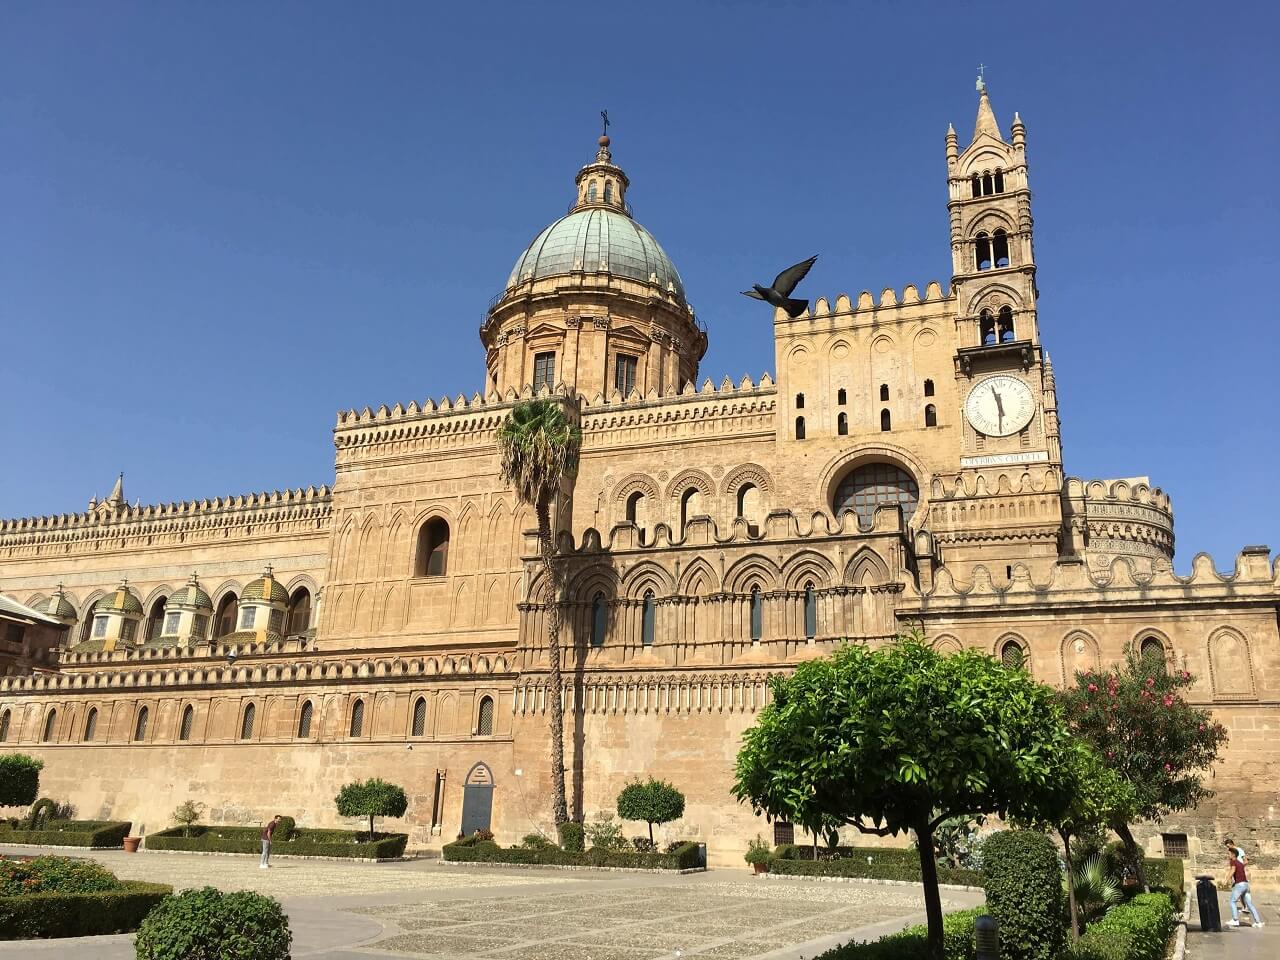 Of the things to doin Palermo, visiting the magnificent cathedral is great